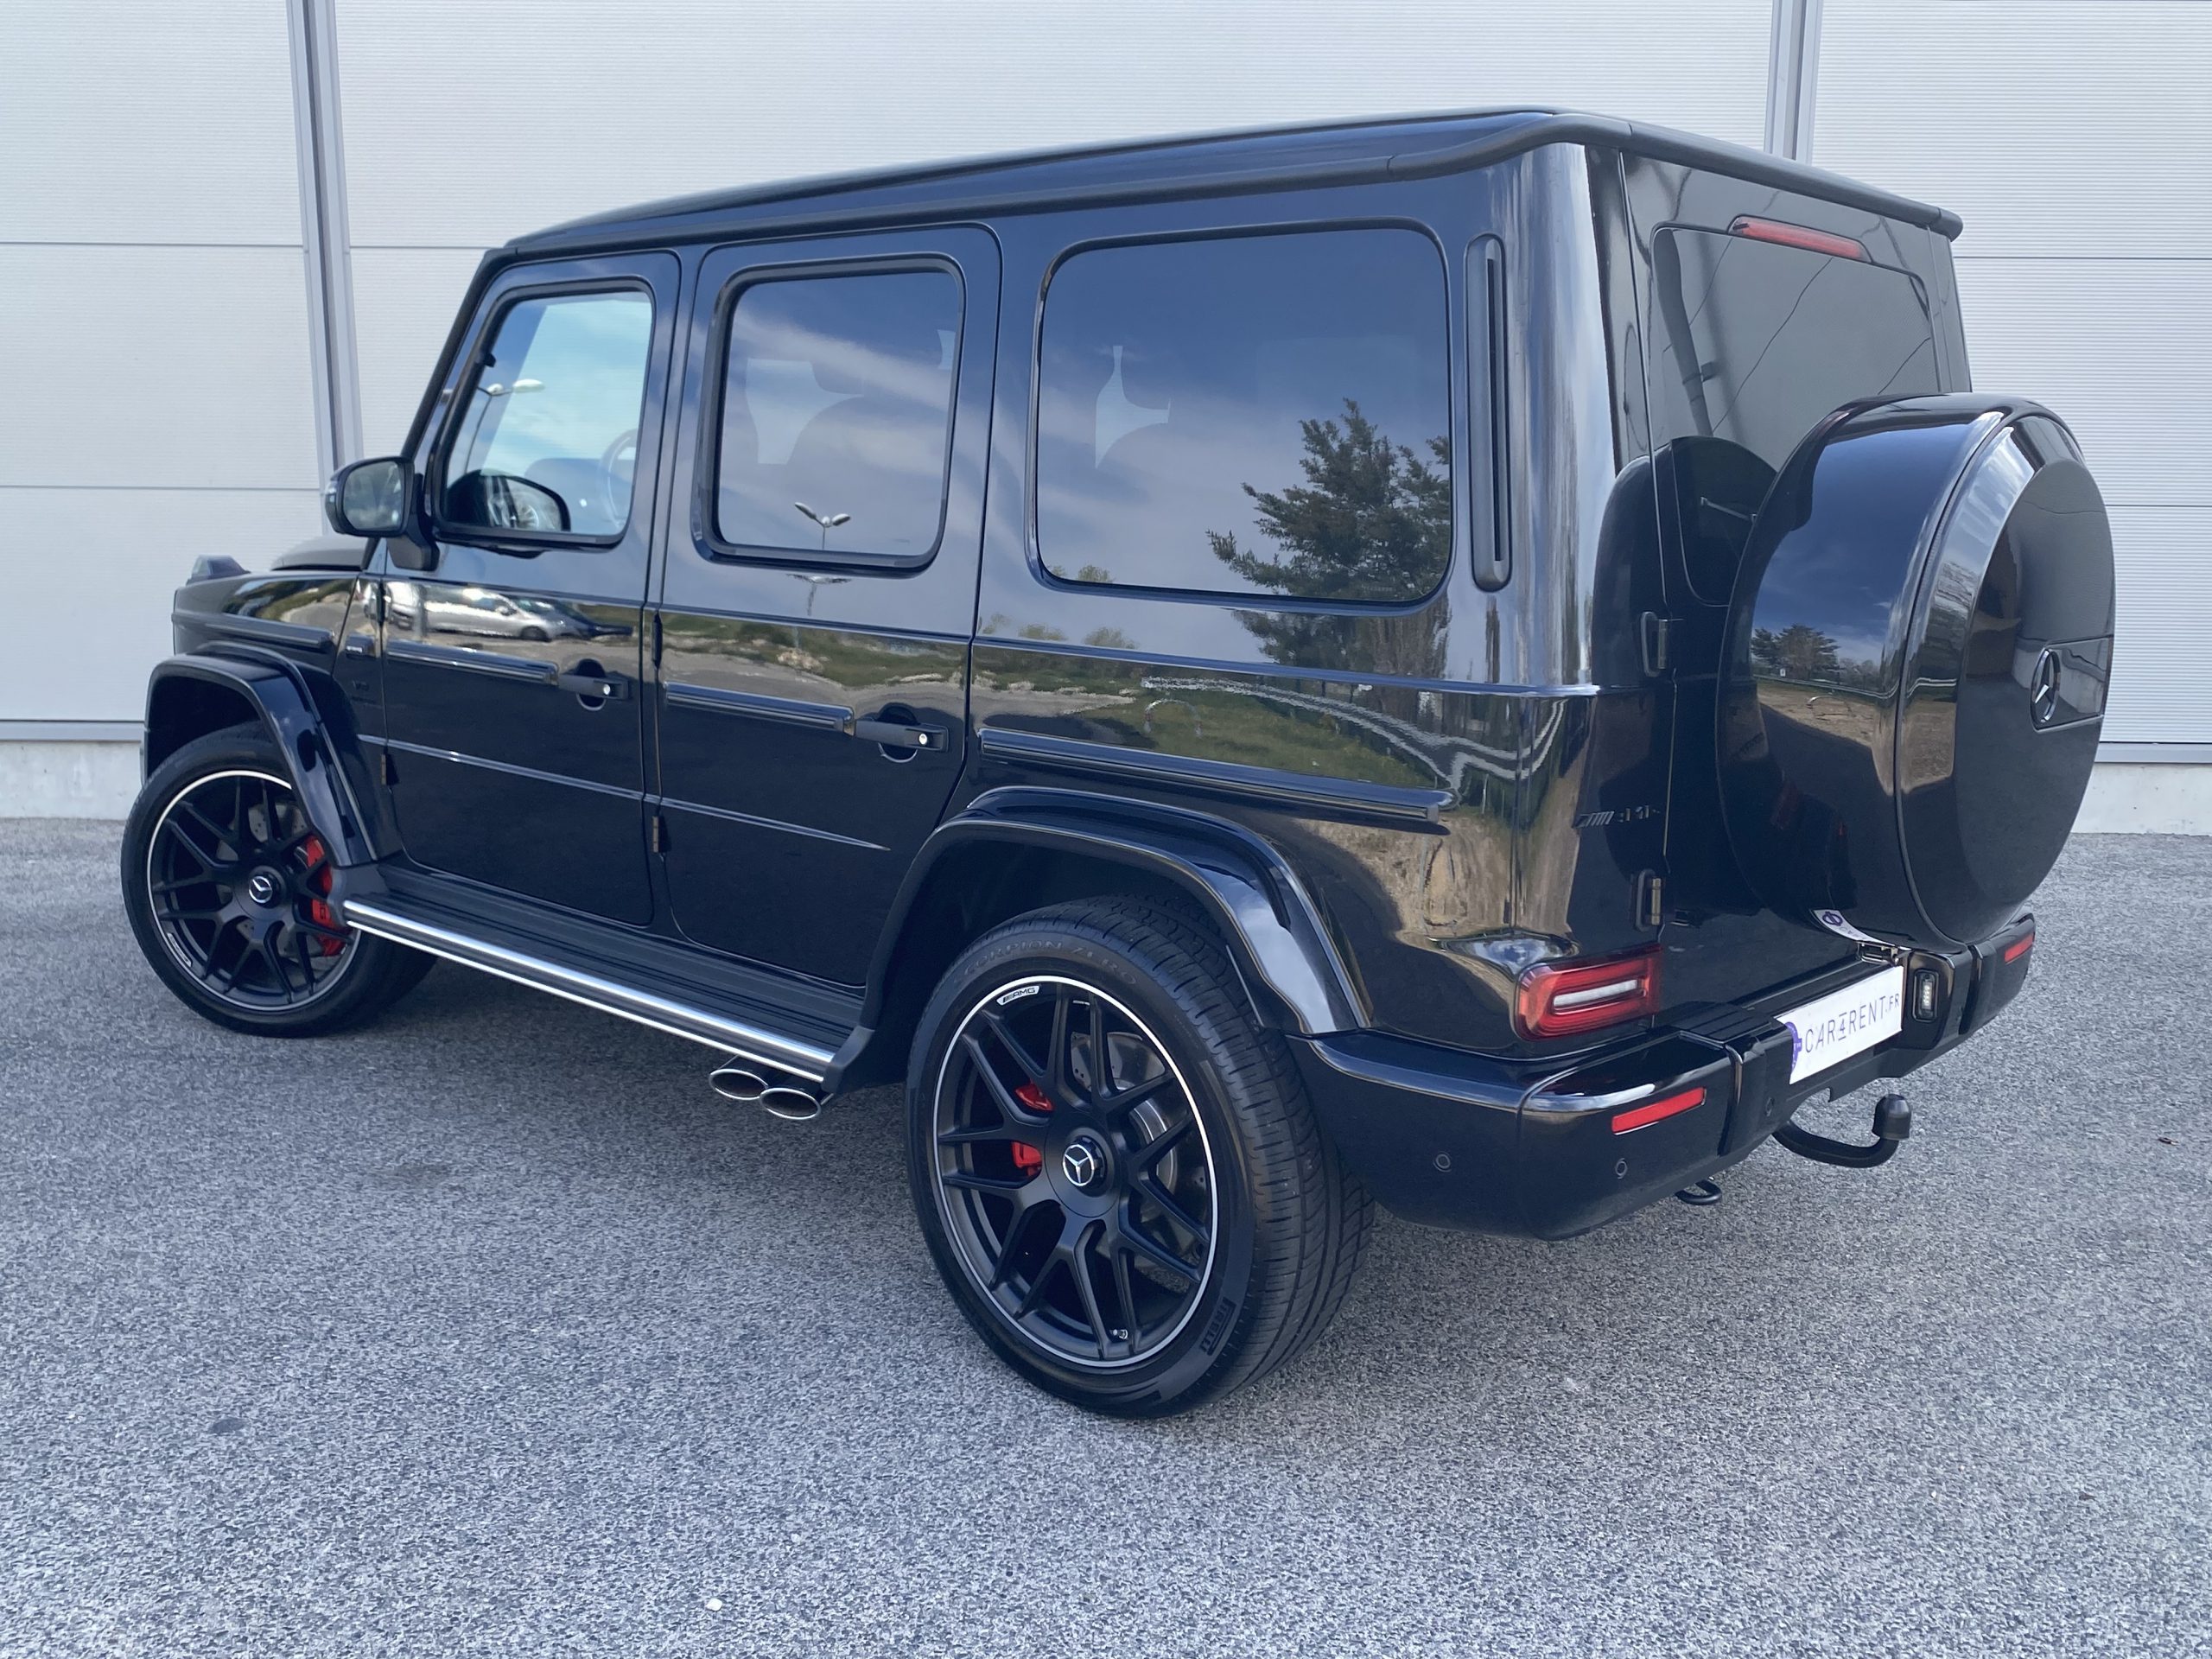 hire a mercedes g-class in french alps, rent a mercedes g63, rent a mercedes g wagon, rent a mercedes g63 cannes